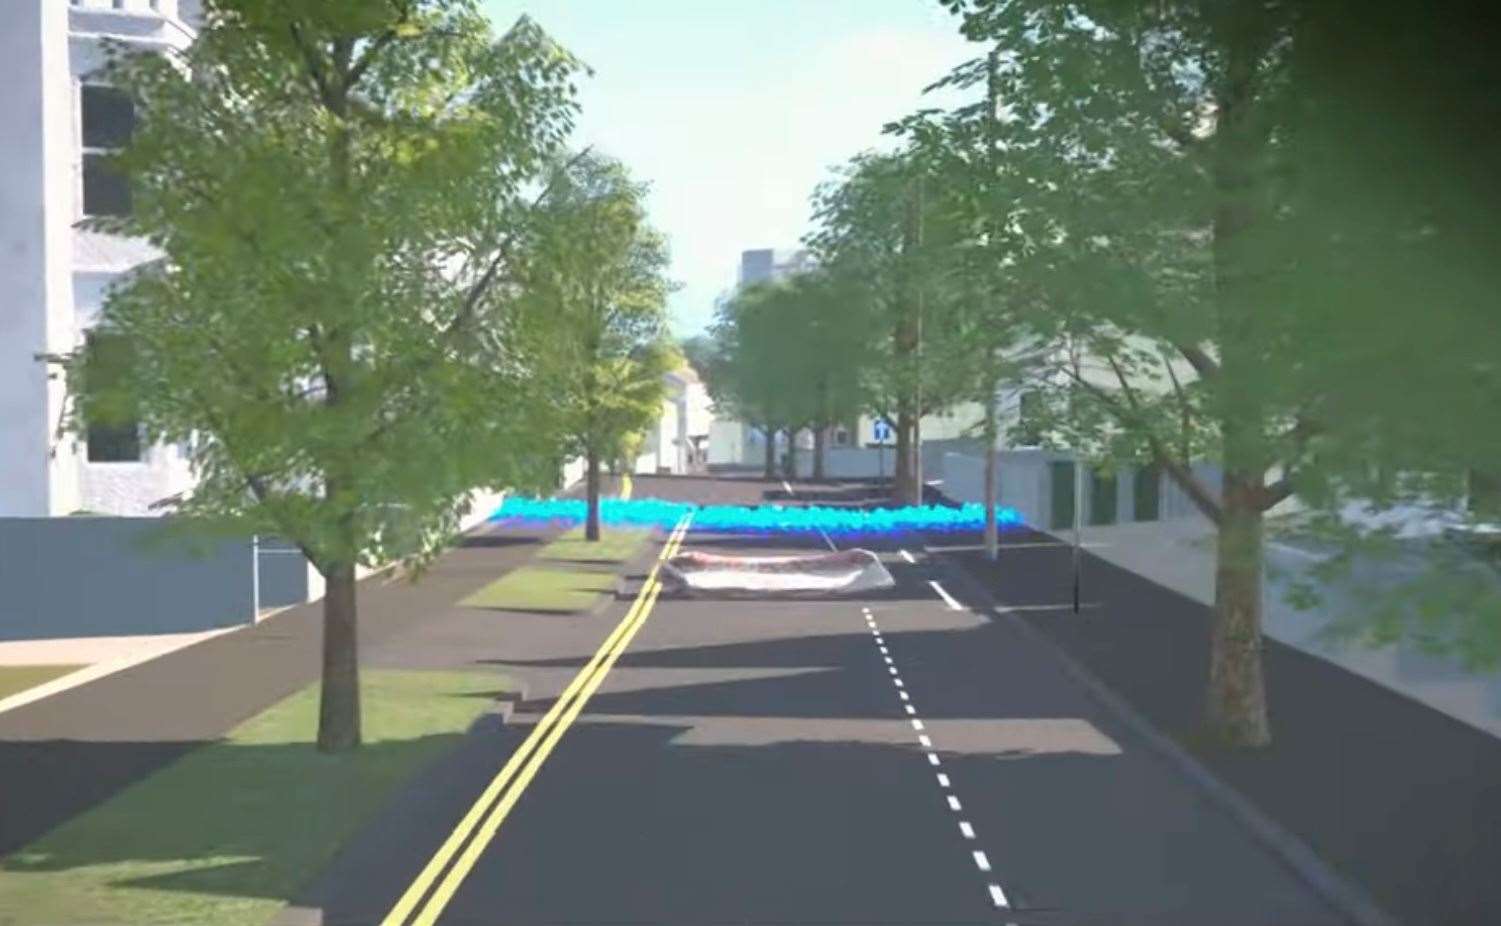 A host of trees and plants are shown being planted along the roadside in Cheriton Gardens in the virtual reality video. Picture: FHDC